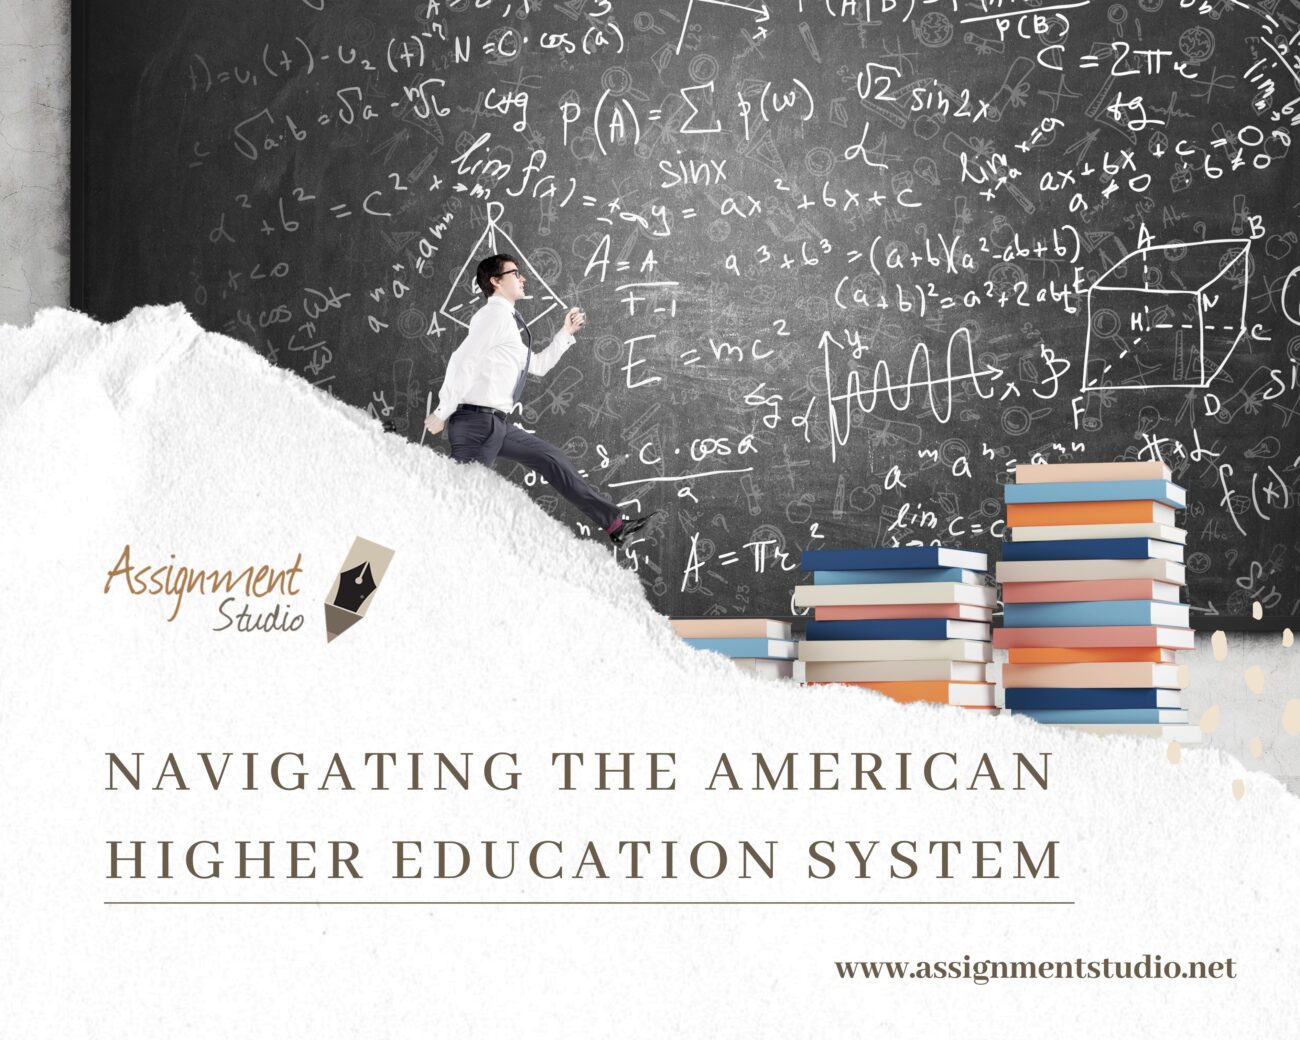 Navigating the American Higher Education System